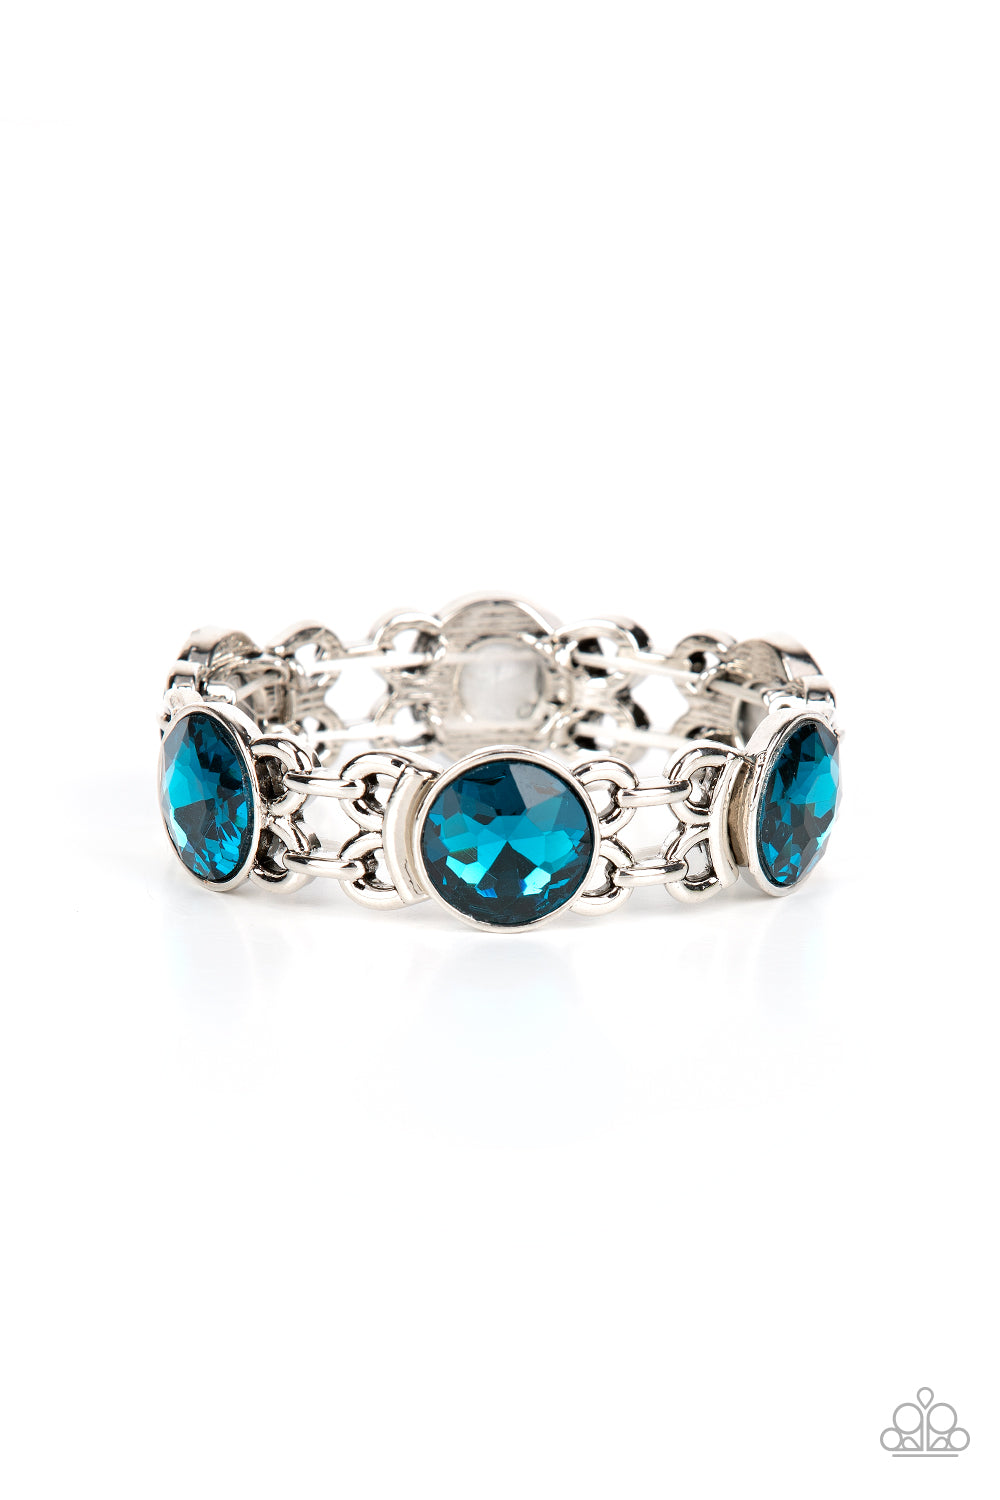 Devoted to Drama Blue Bracelet - Paparazzi Accessories  Featuring edgy chain-like fittings, a sparkly series of oversized blue rhinestones are threaded along stretchy bands around the wrist for a dramatic pop of glitz.  Sold as one individual bracelet.